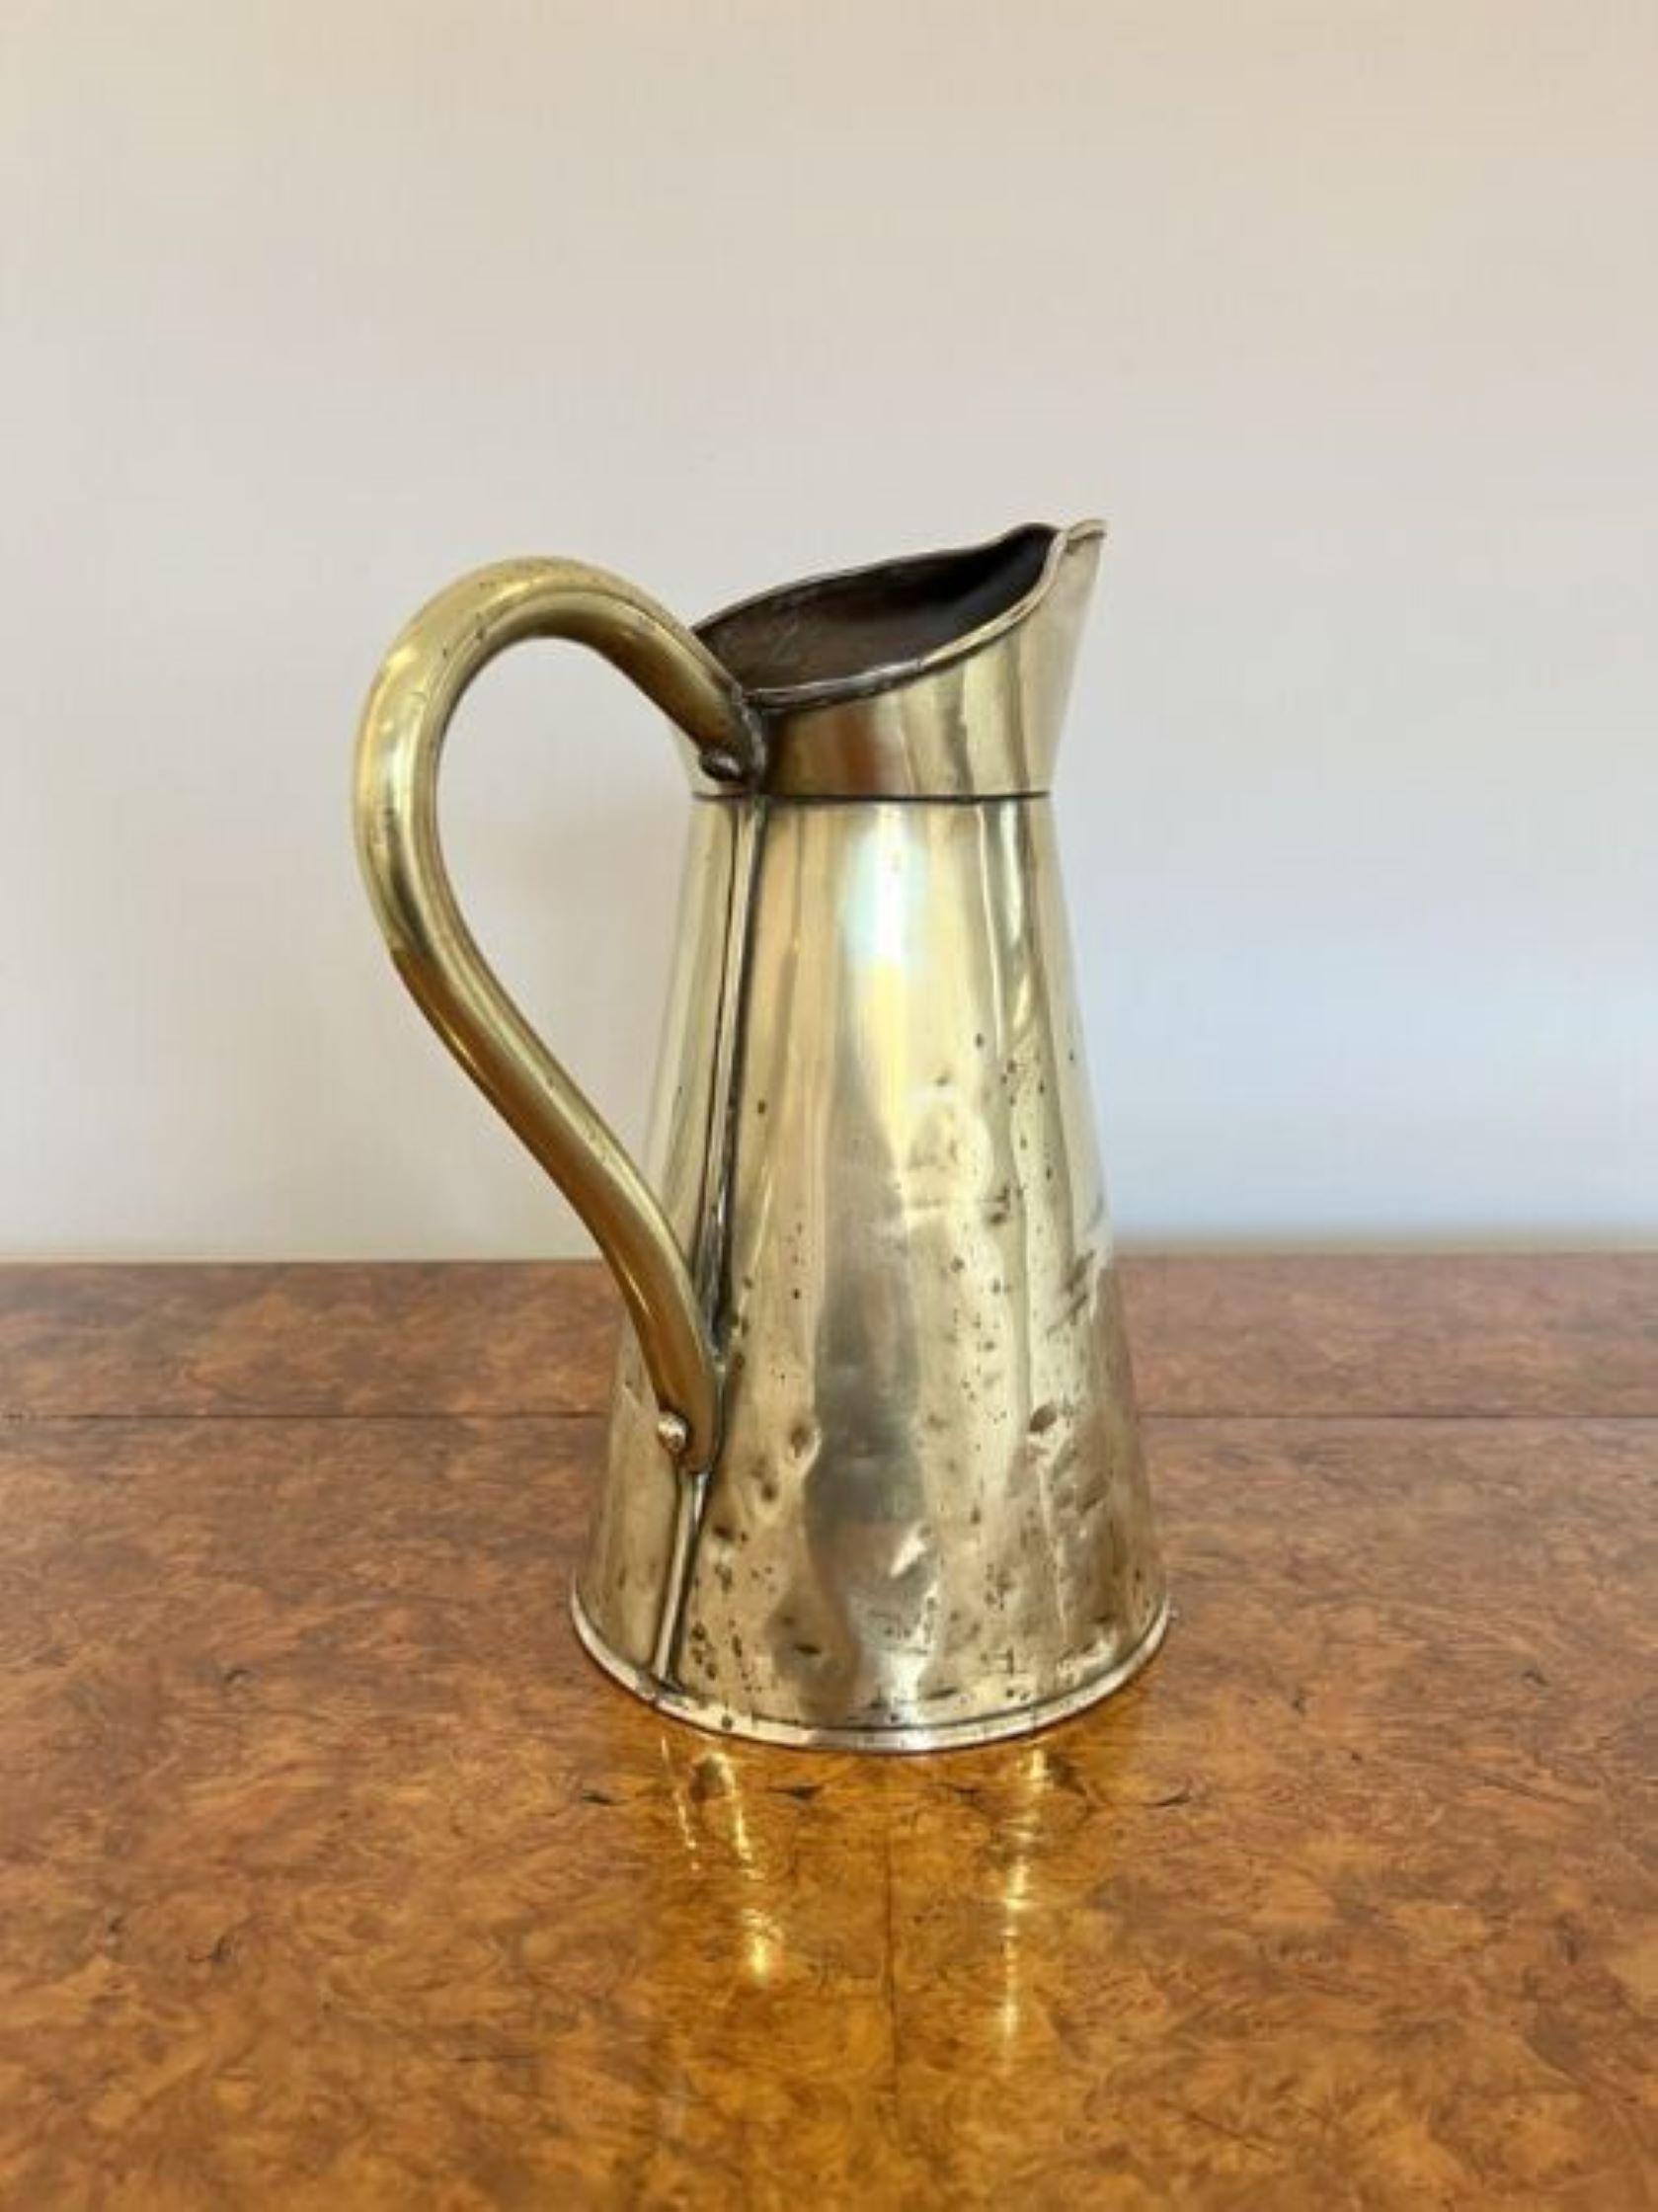 Antique Edwardian brass jug having an antique Edwardian brass jug with a shaped handle to the back.